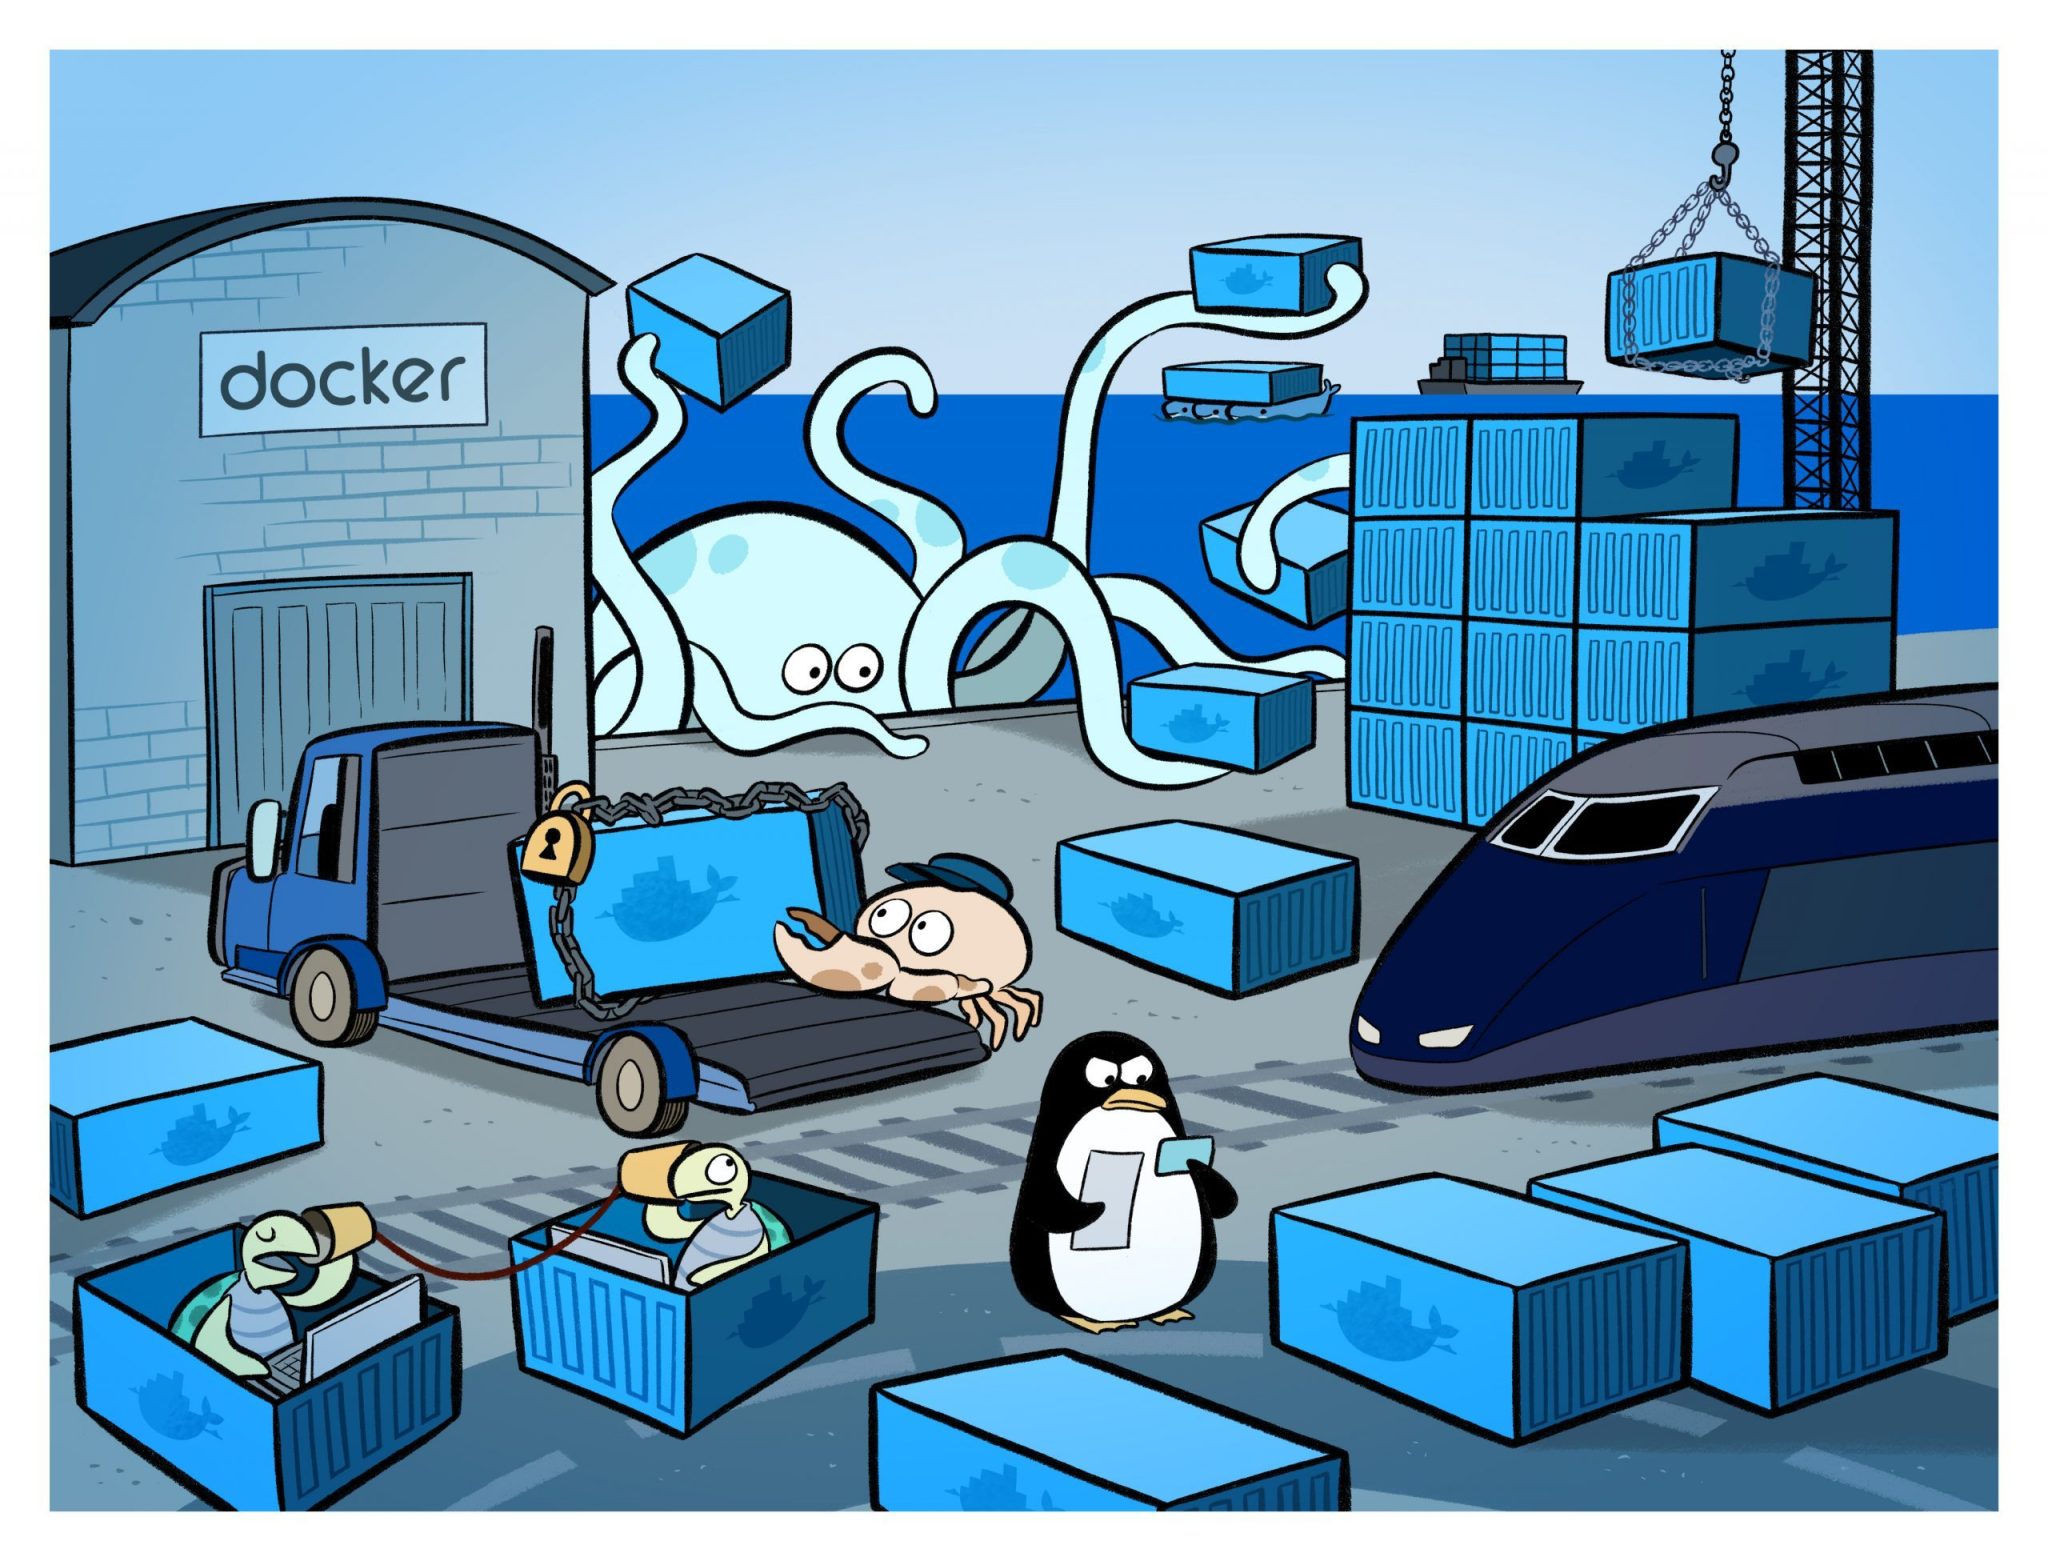 Image from: https://www.docker.com/blog/scaling-dockers-business-to-serve-millions-more-developers-storage/